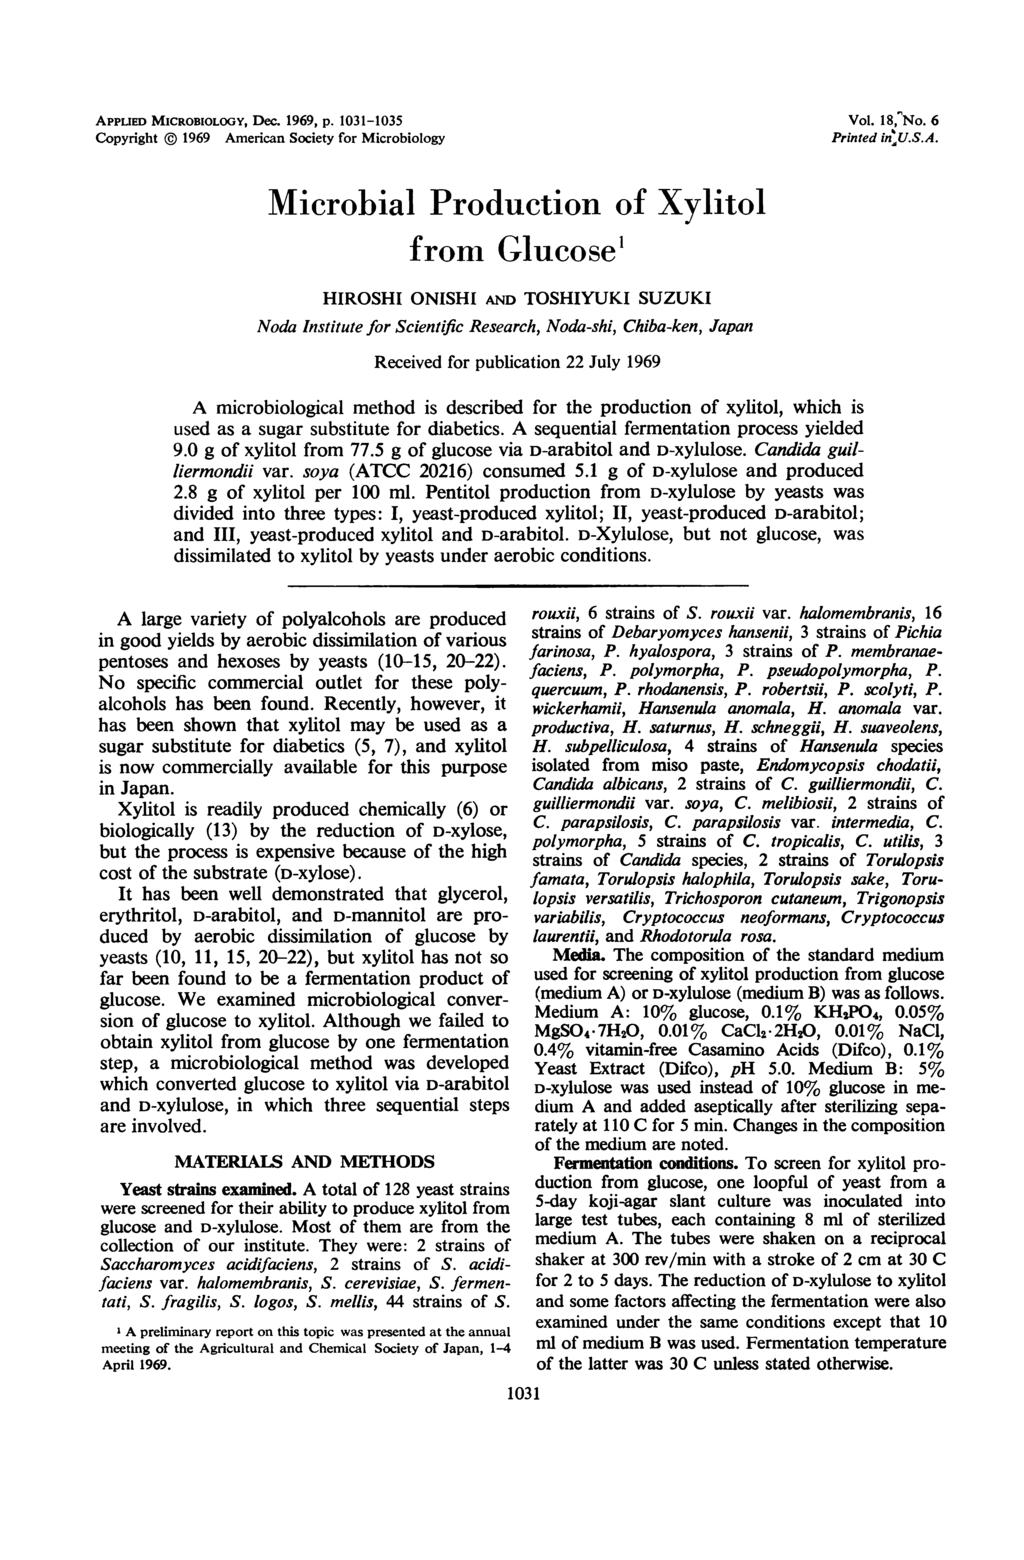 APPuED MICROBIOLOGY, Dec. 1969, p. 1031-1035 Vol. 18, No. 6 Copyright ( 1969 American Society for Microbiology Printed in" U.S.A. Microbial Production of Xylitol from Glucose' HIROSHI ONISHI AND